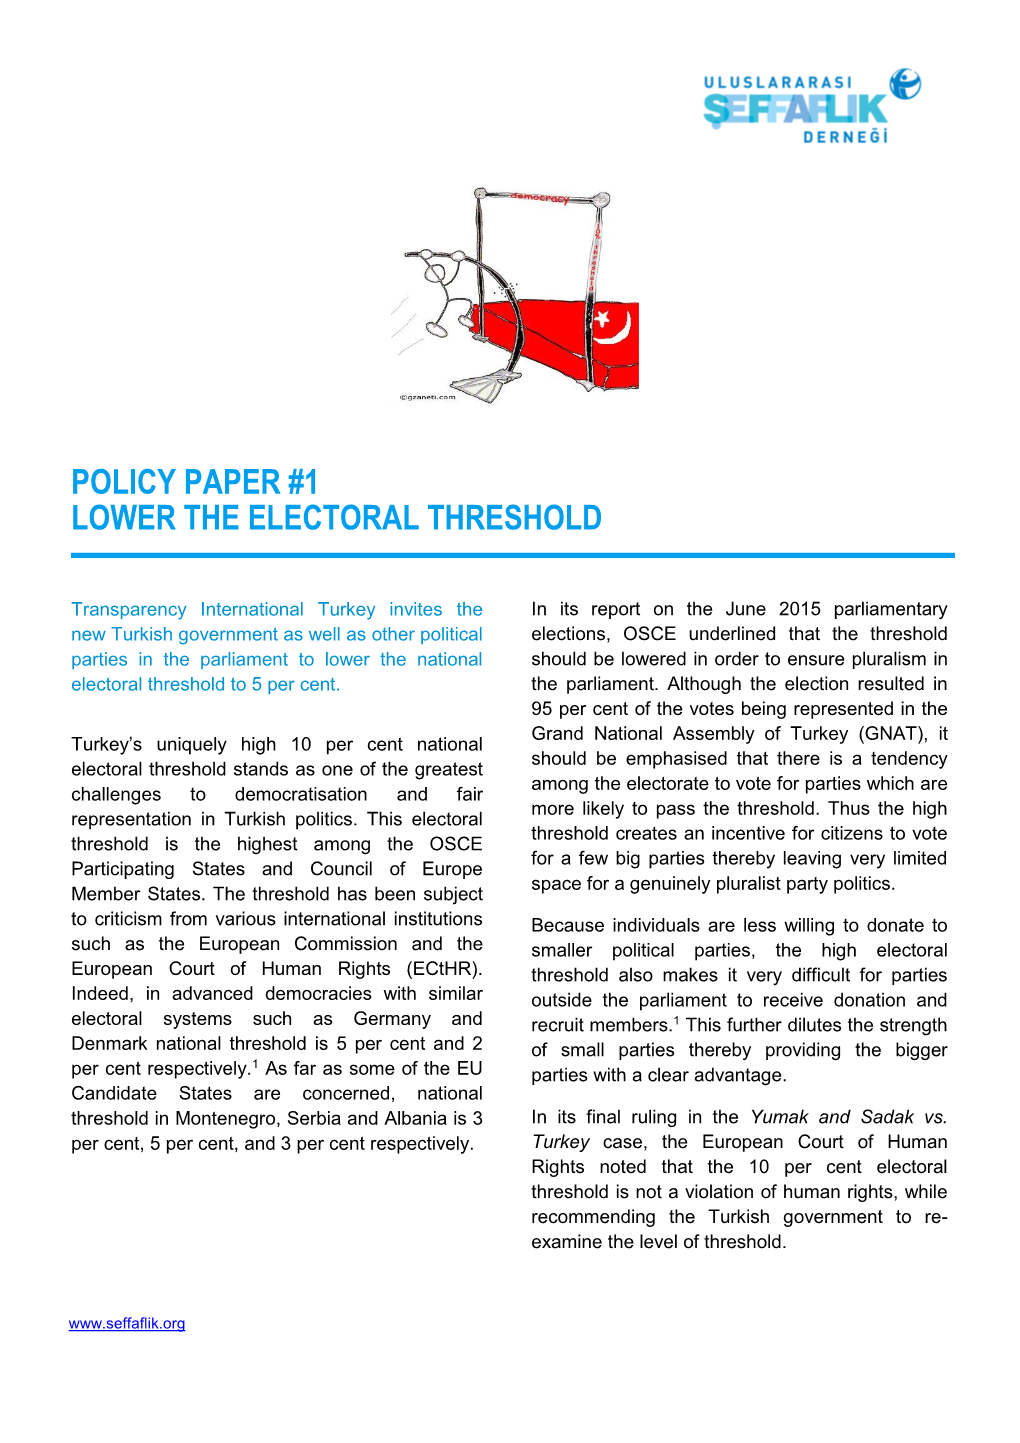 Policy Paper #1 Lower the Electoral Threshold